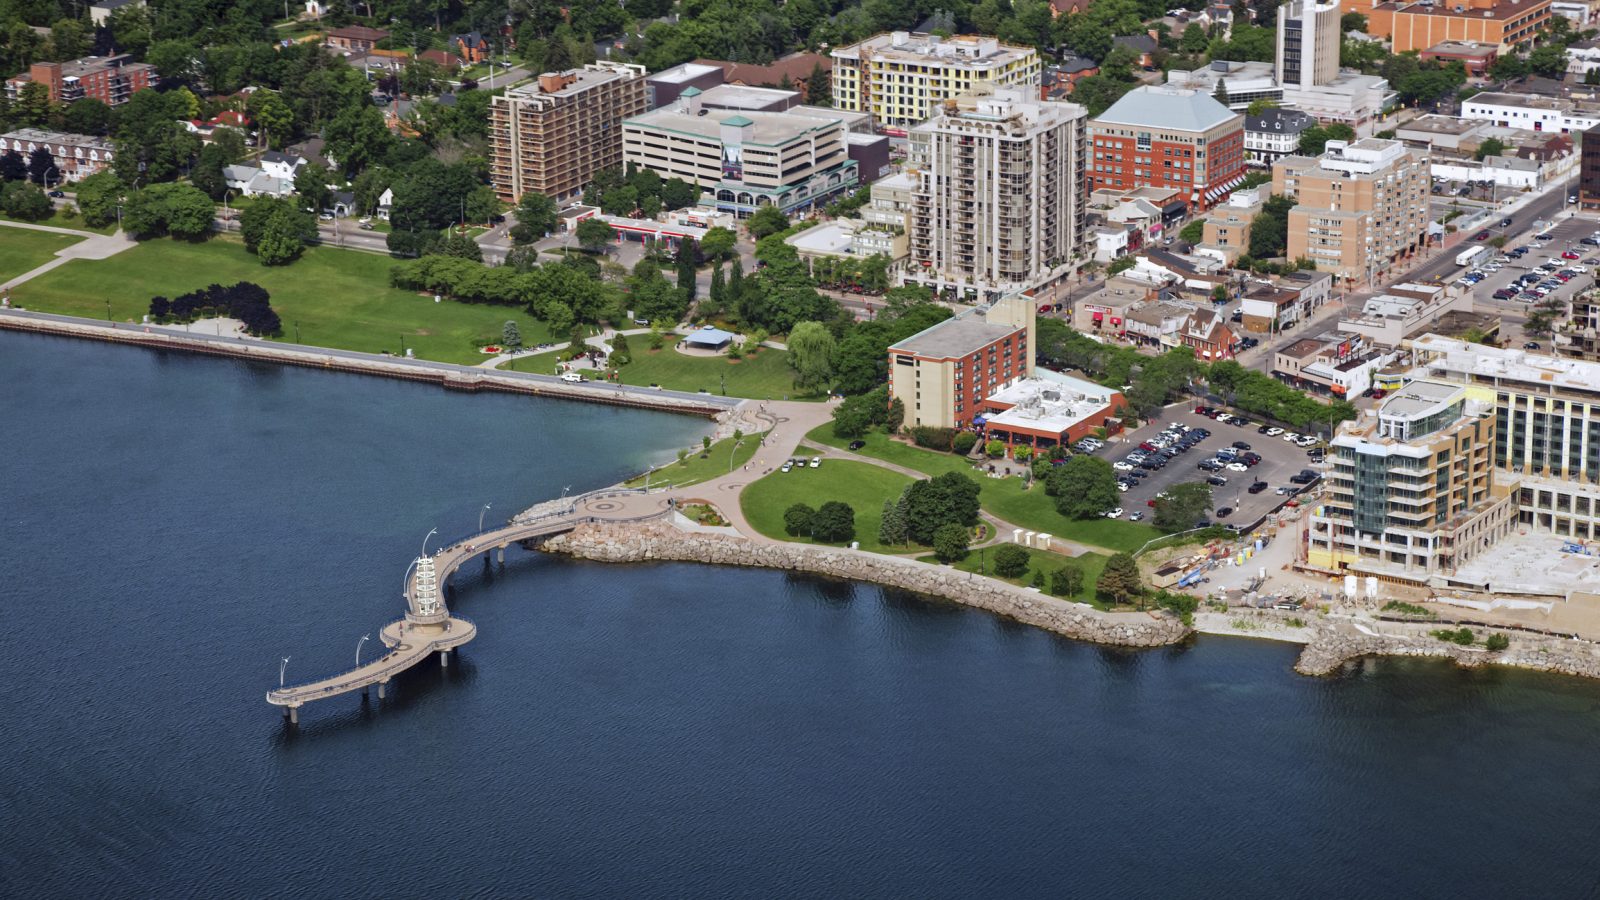 An aerial view of the City of Burlington overlooking the waterway.